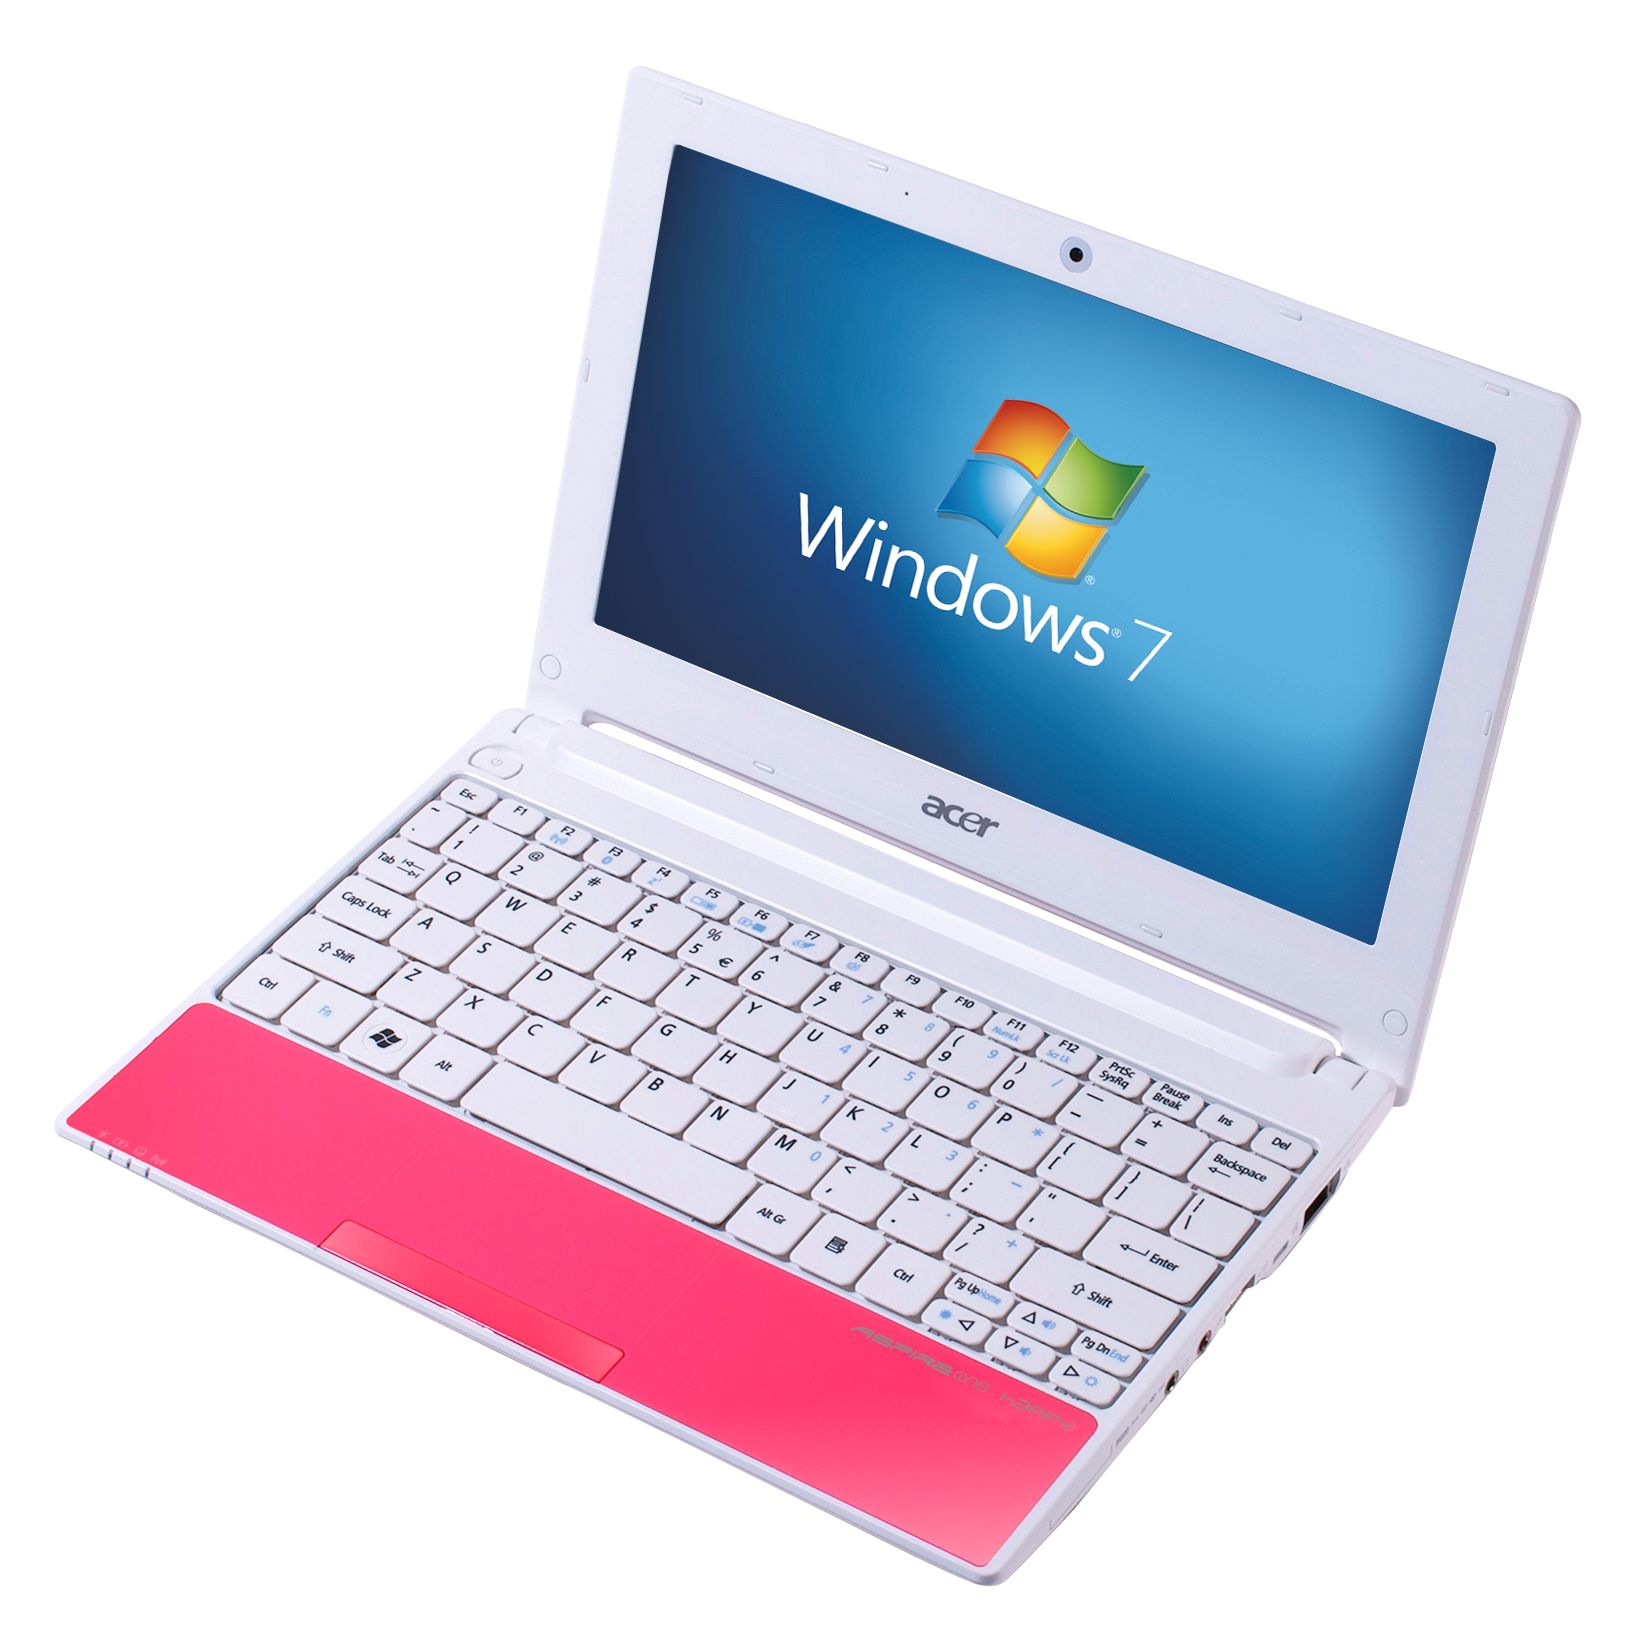 Acer Aspire One Happy Netbook, 1.66GHz with 10.1 Inch Display, Candy Pink at John Lewis